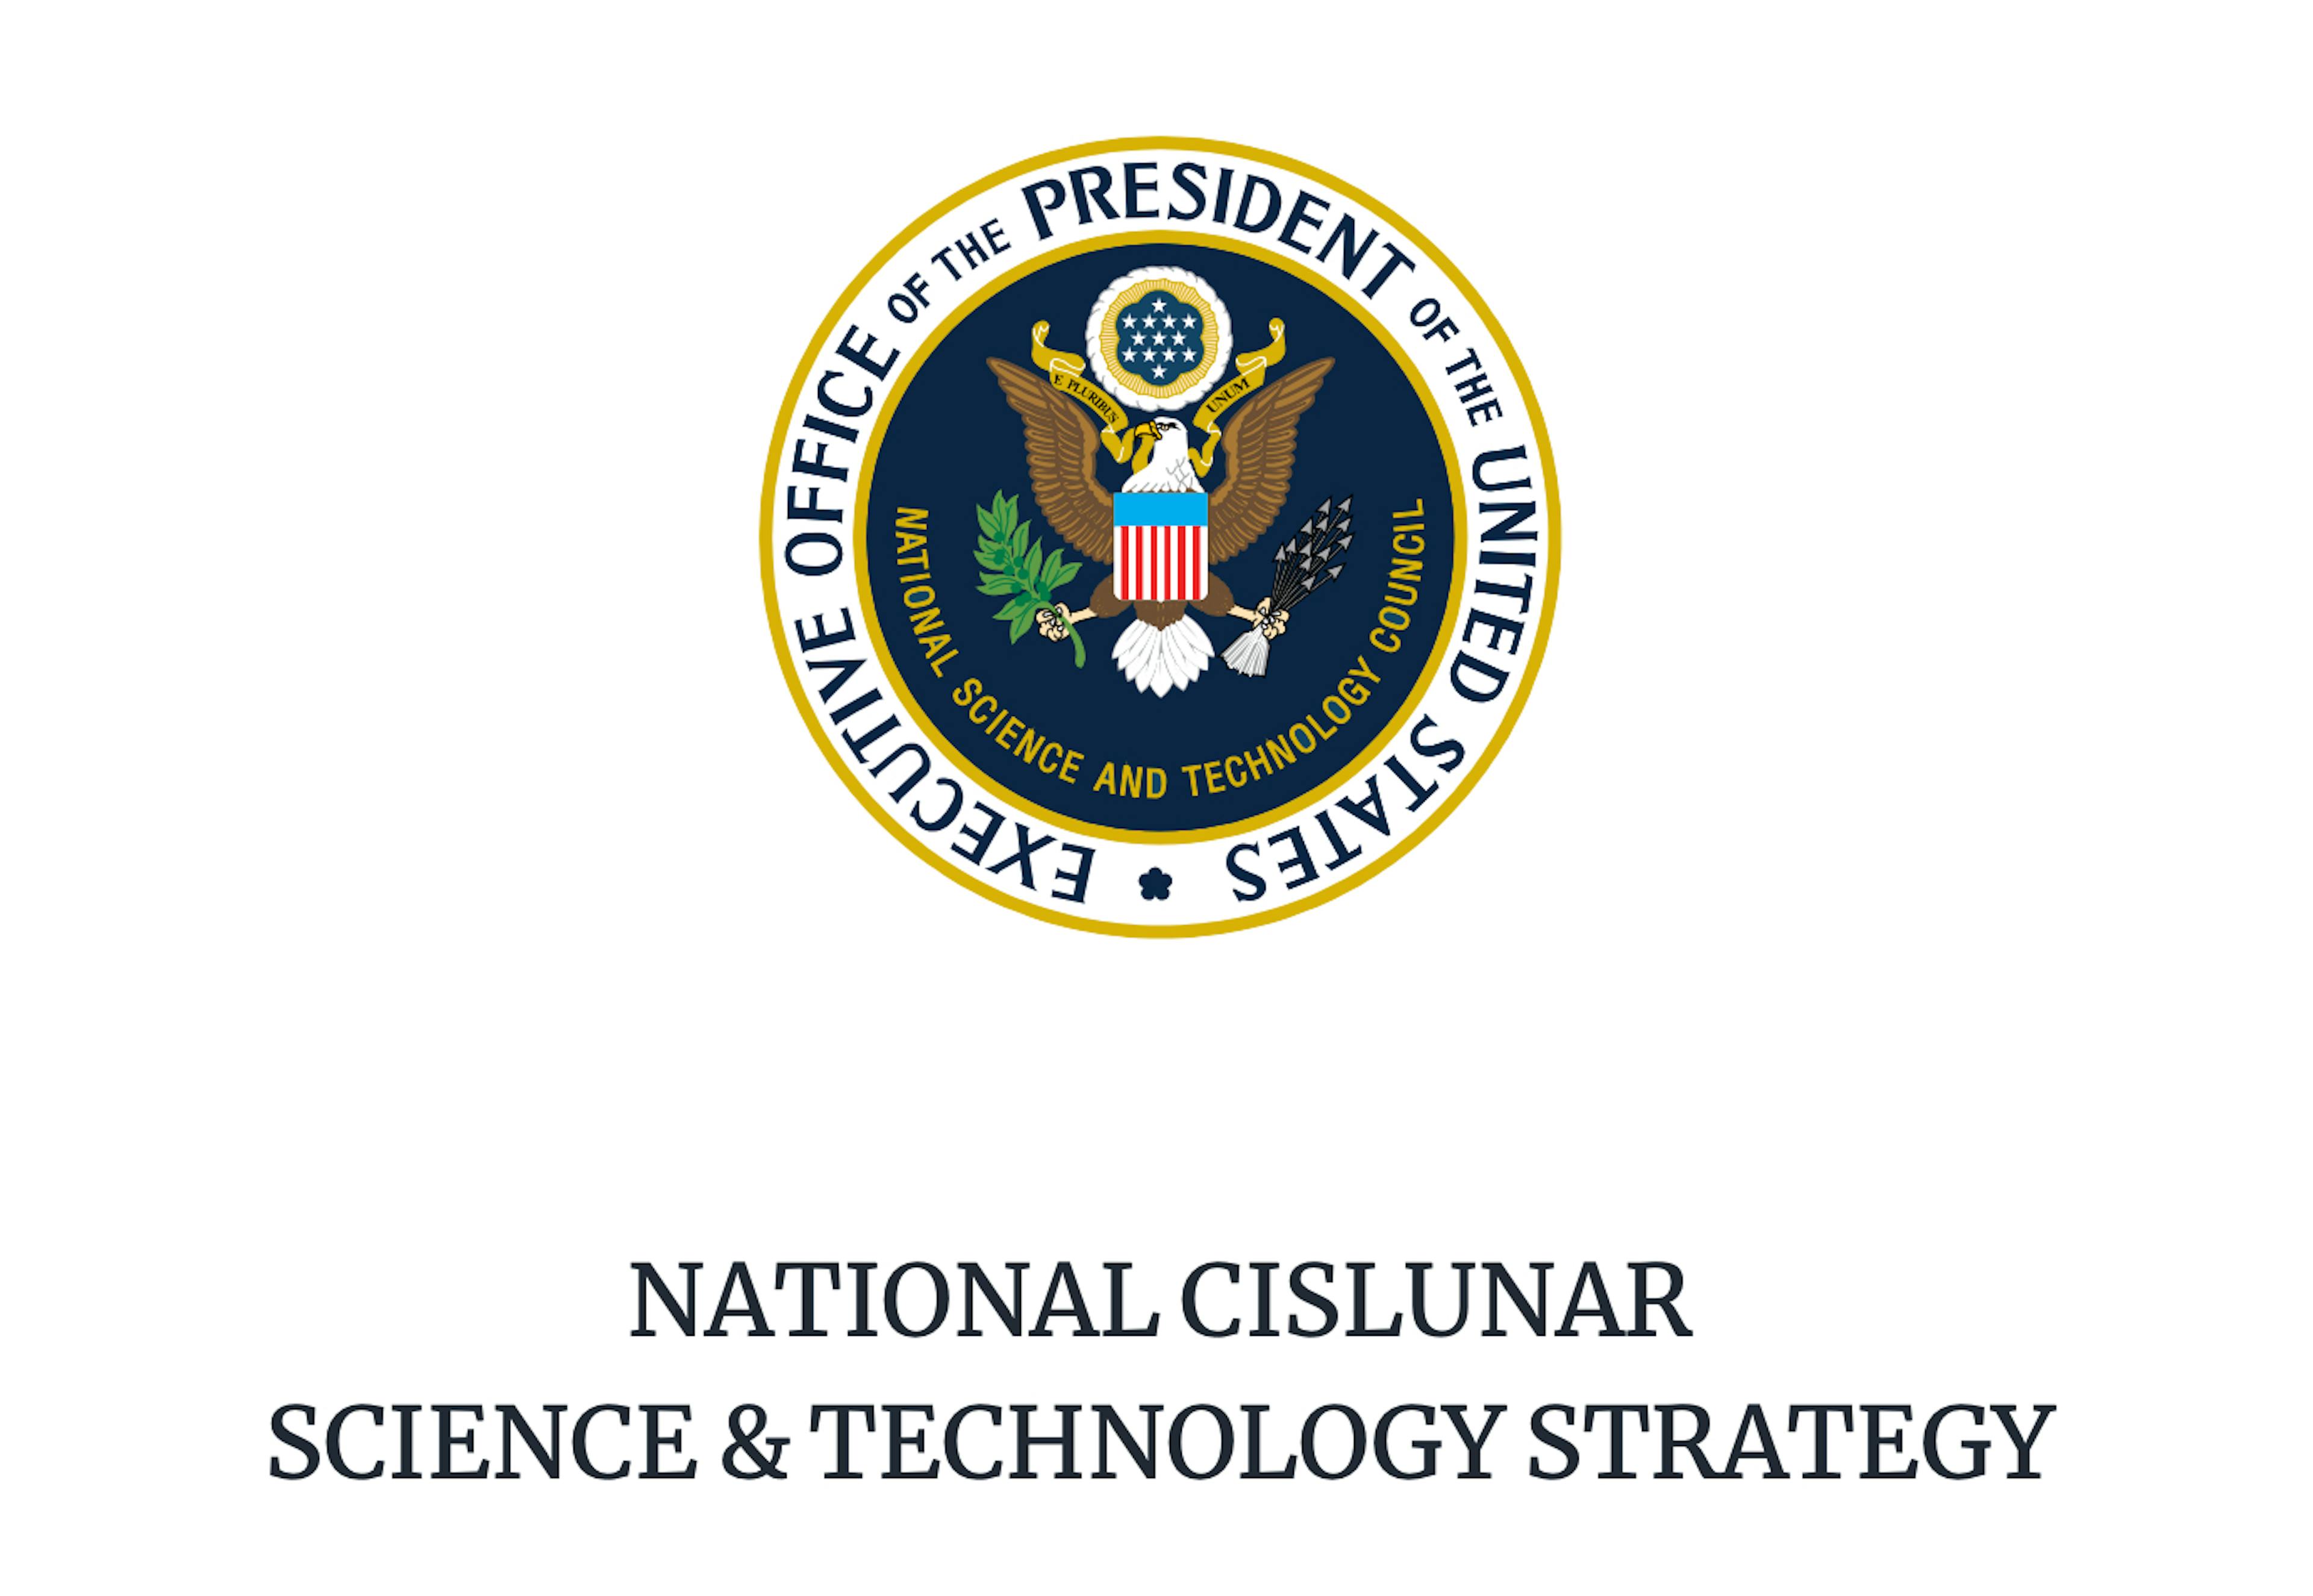 featured image - Taming the Cosmos: U.S. Unveils its First Cislunar Science & Technology Strategy